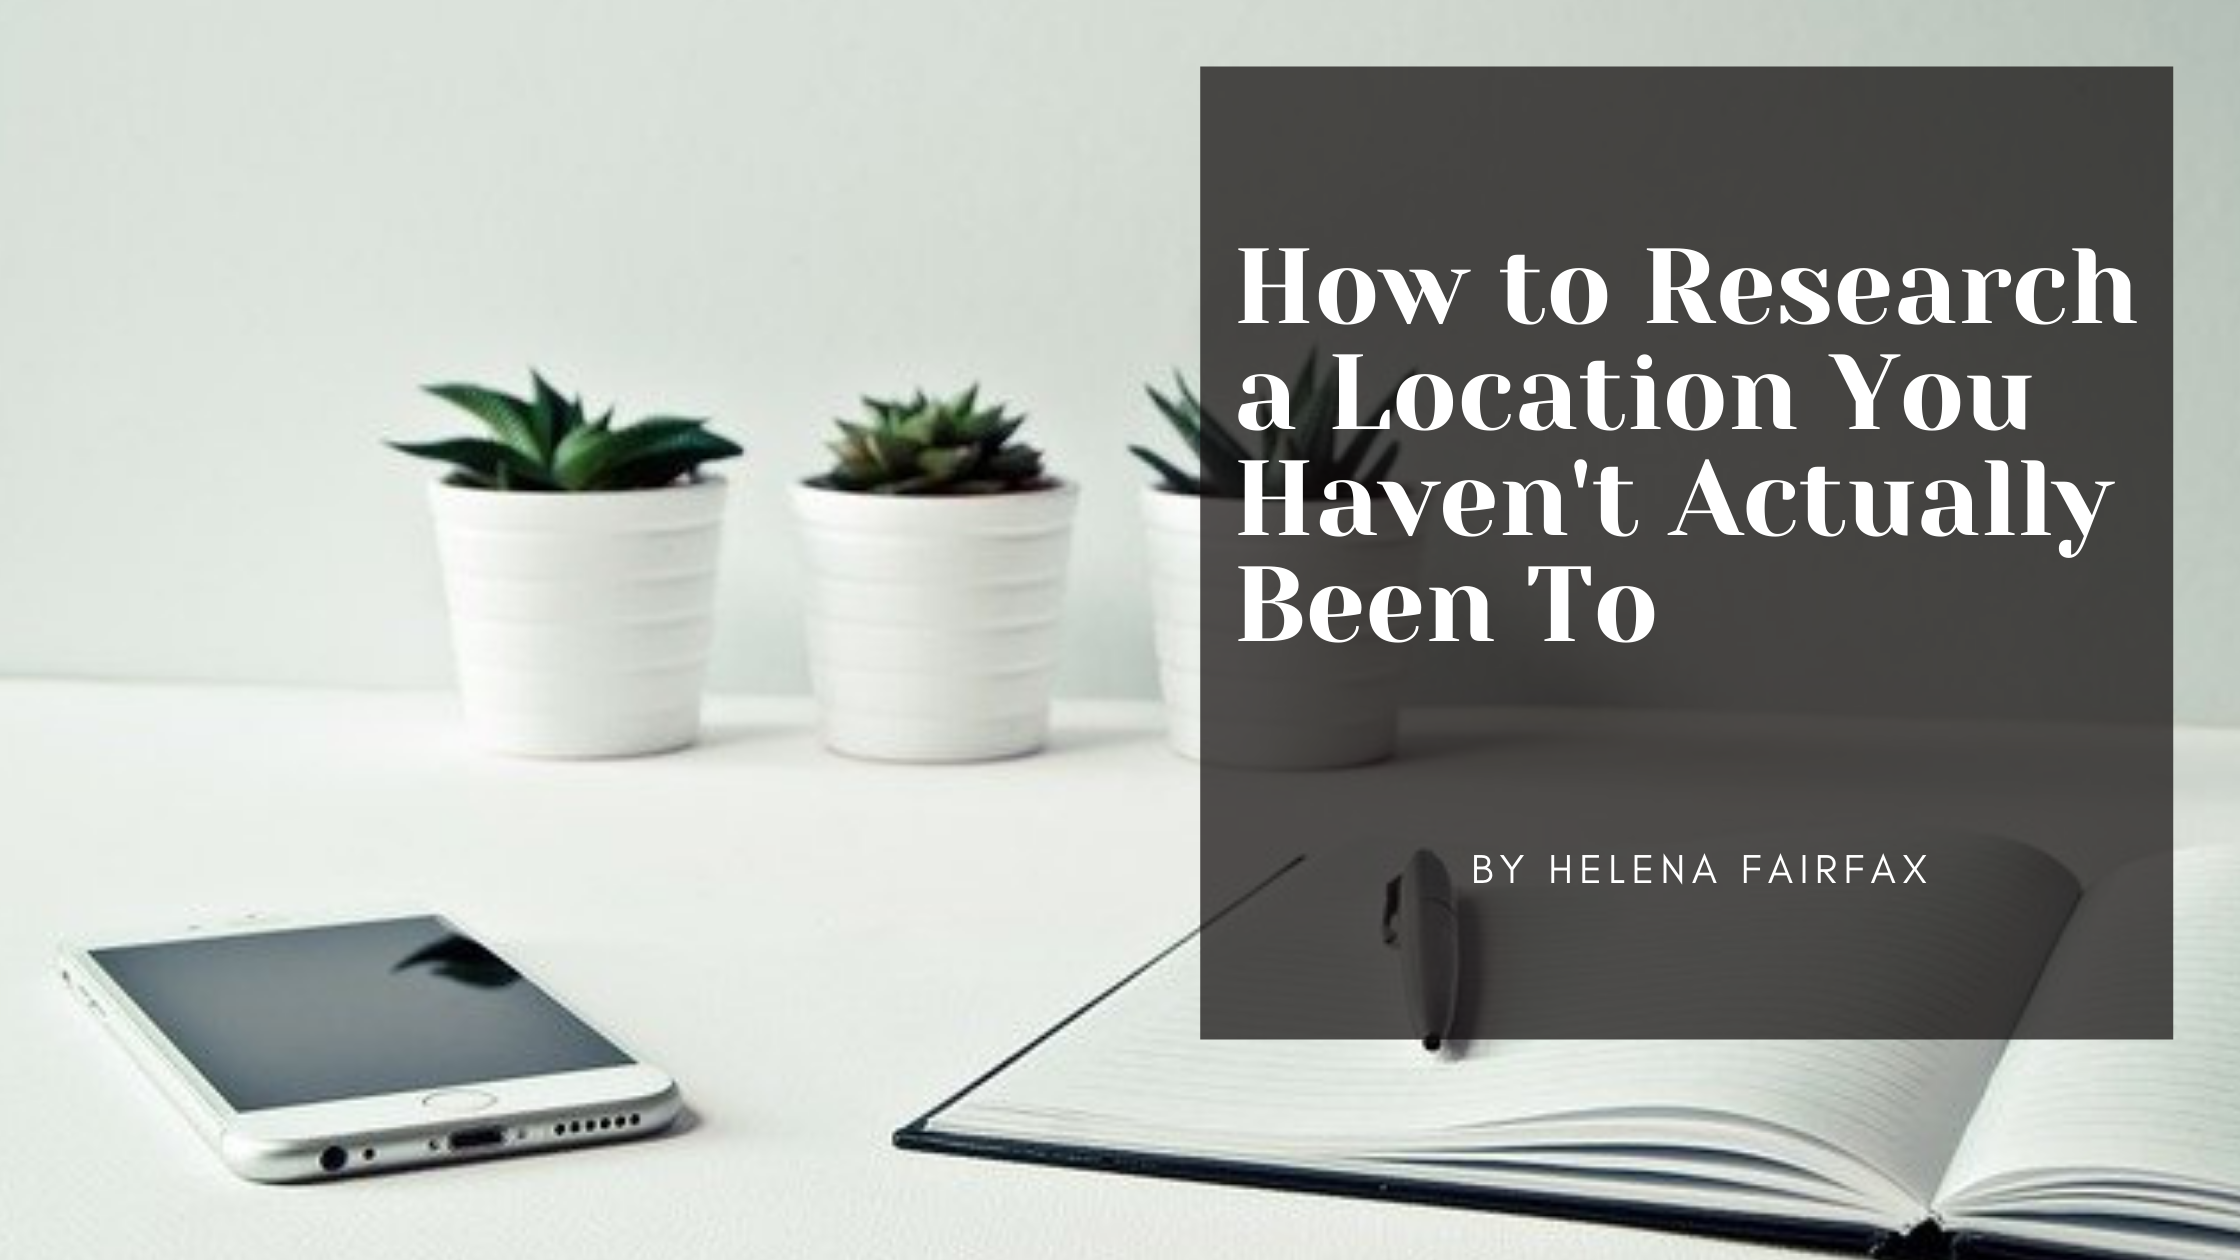 How to Research a Location You Haven’t Actually Been To